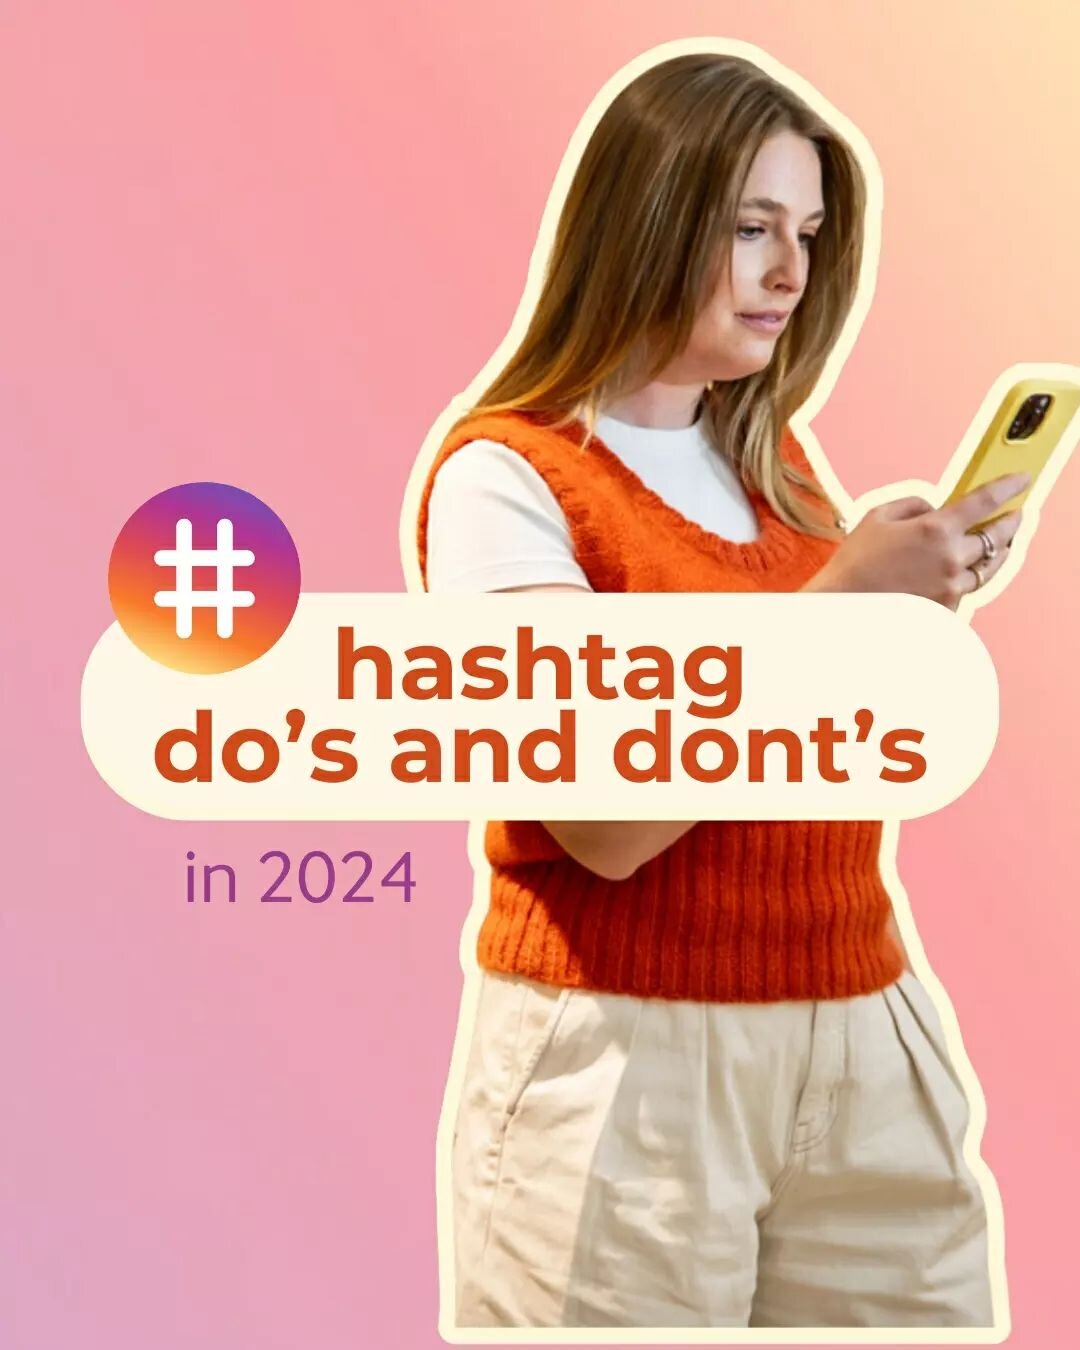 There's a lot of info and &quot;hacks&quot; circulating about hashtags. And as Instagram evolves, hashtags do too! This serves as your 2024 guide to effectively utilize hashtags for your brand on Instagram. Swipe left for my do's and dont's that I've